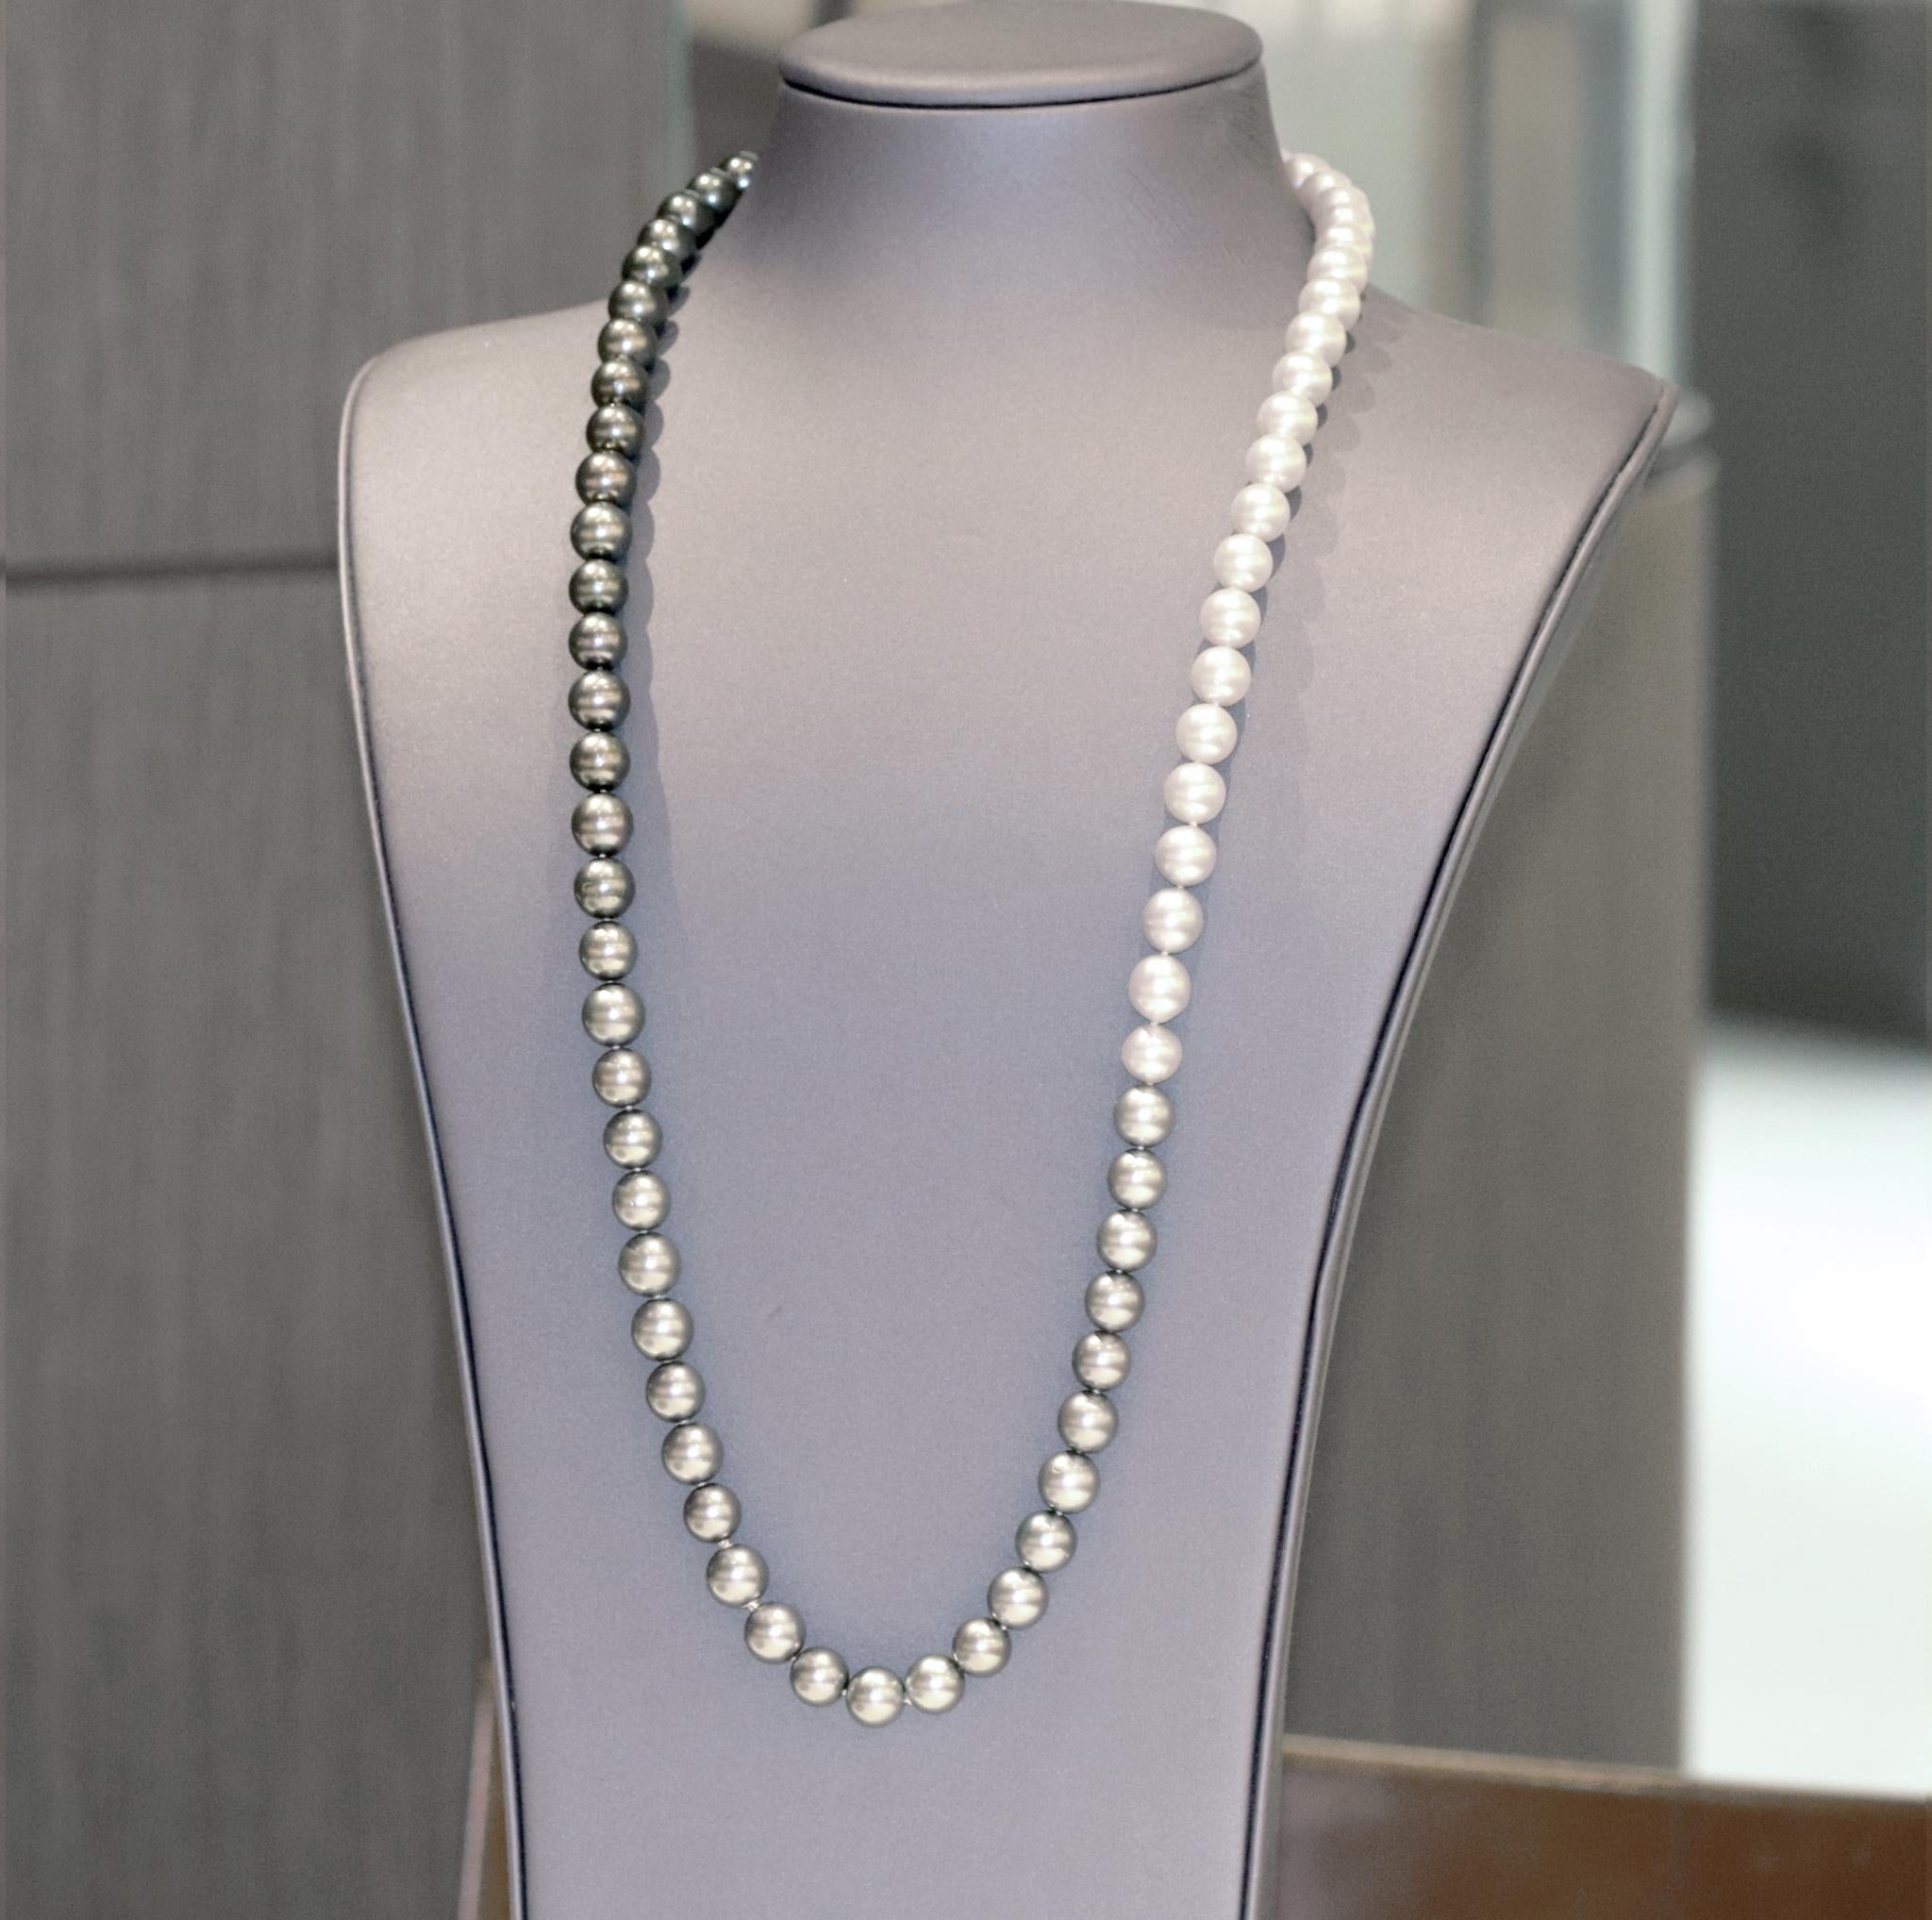 Atelier Zobel Ombré Tahitian and South Sea Pearl Multilength Necklaces 1